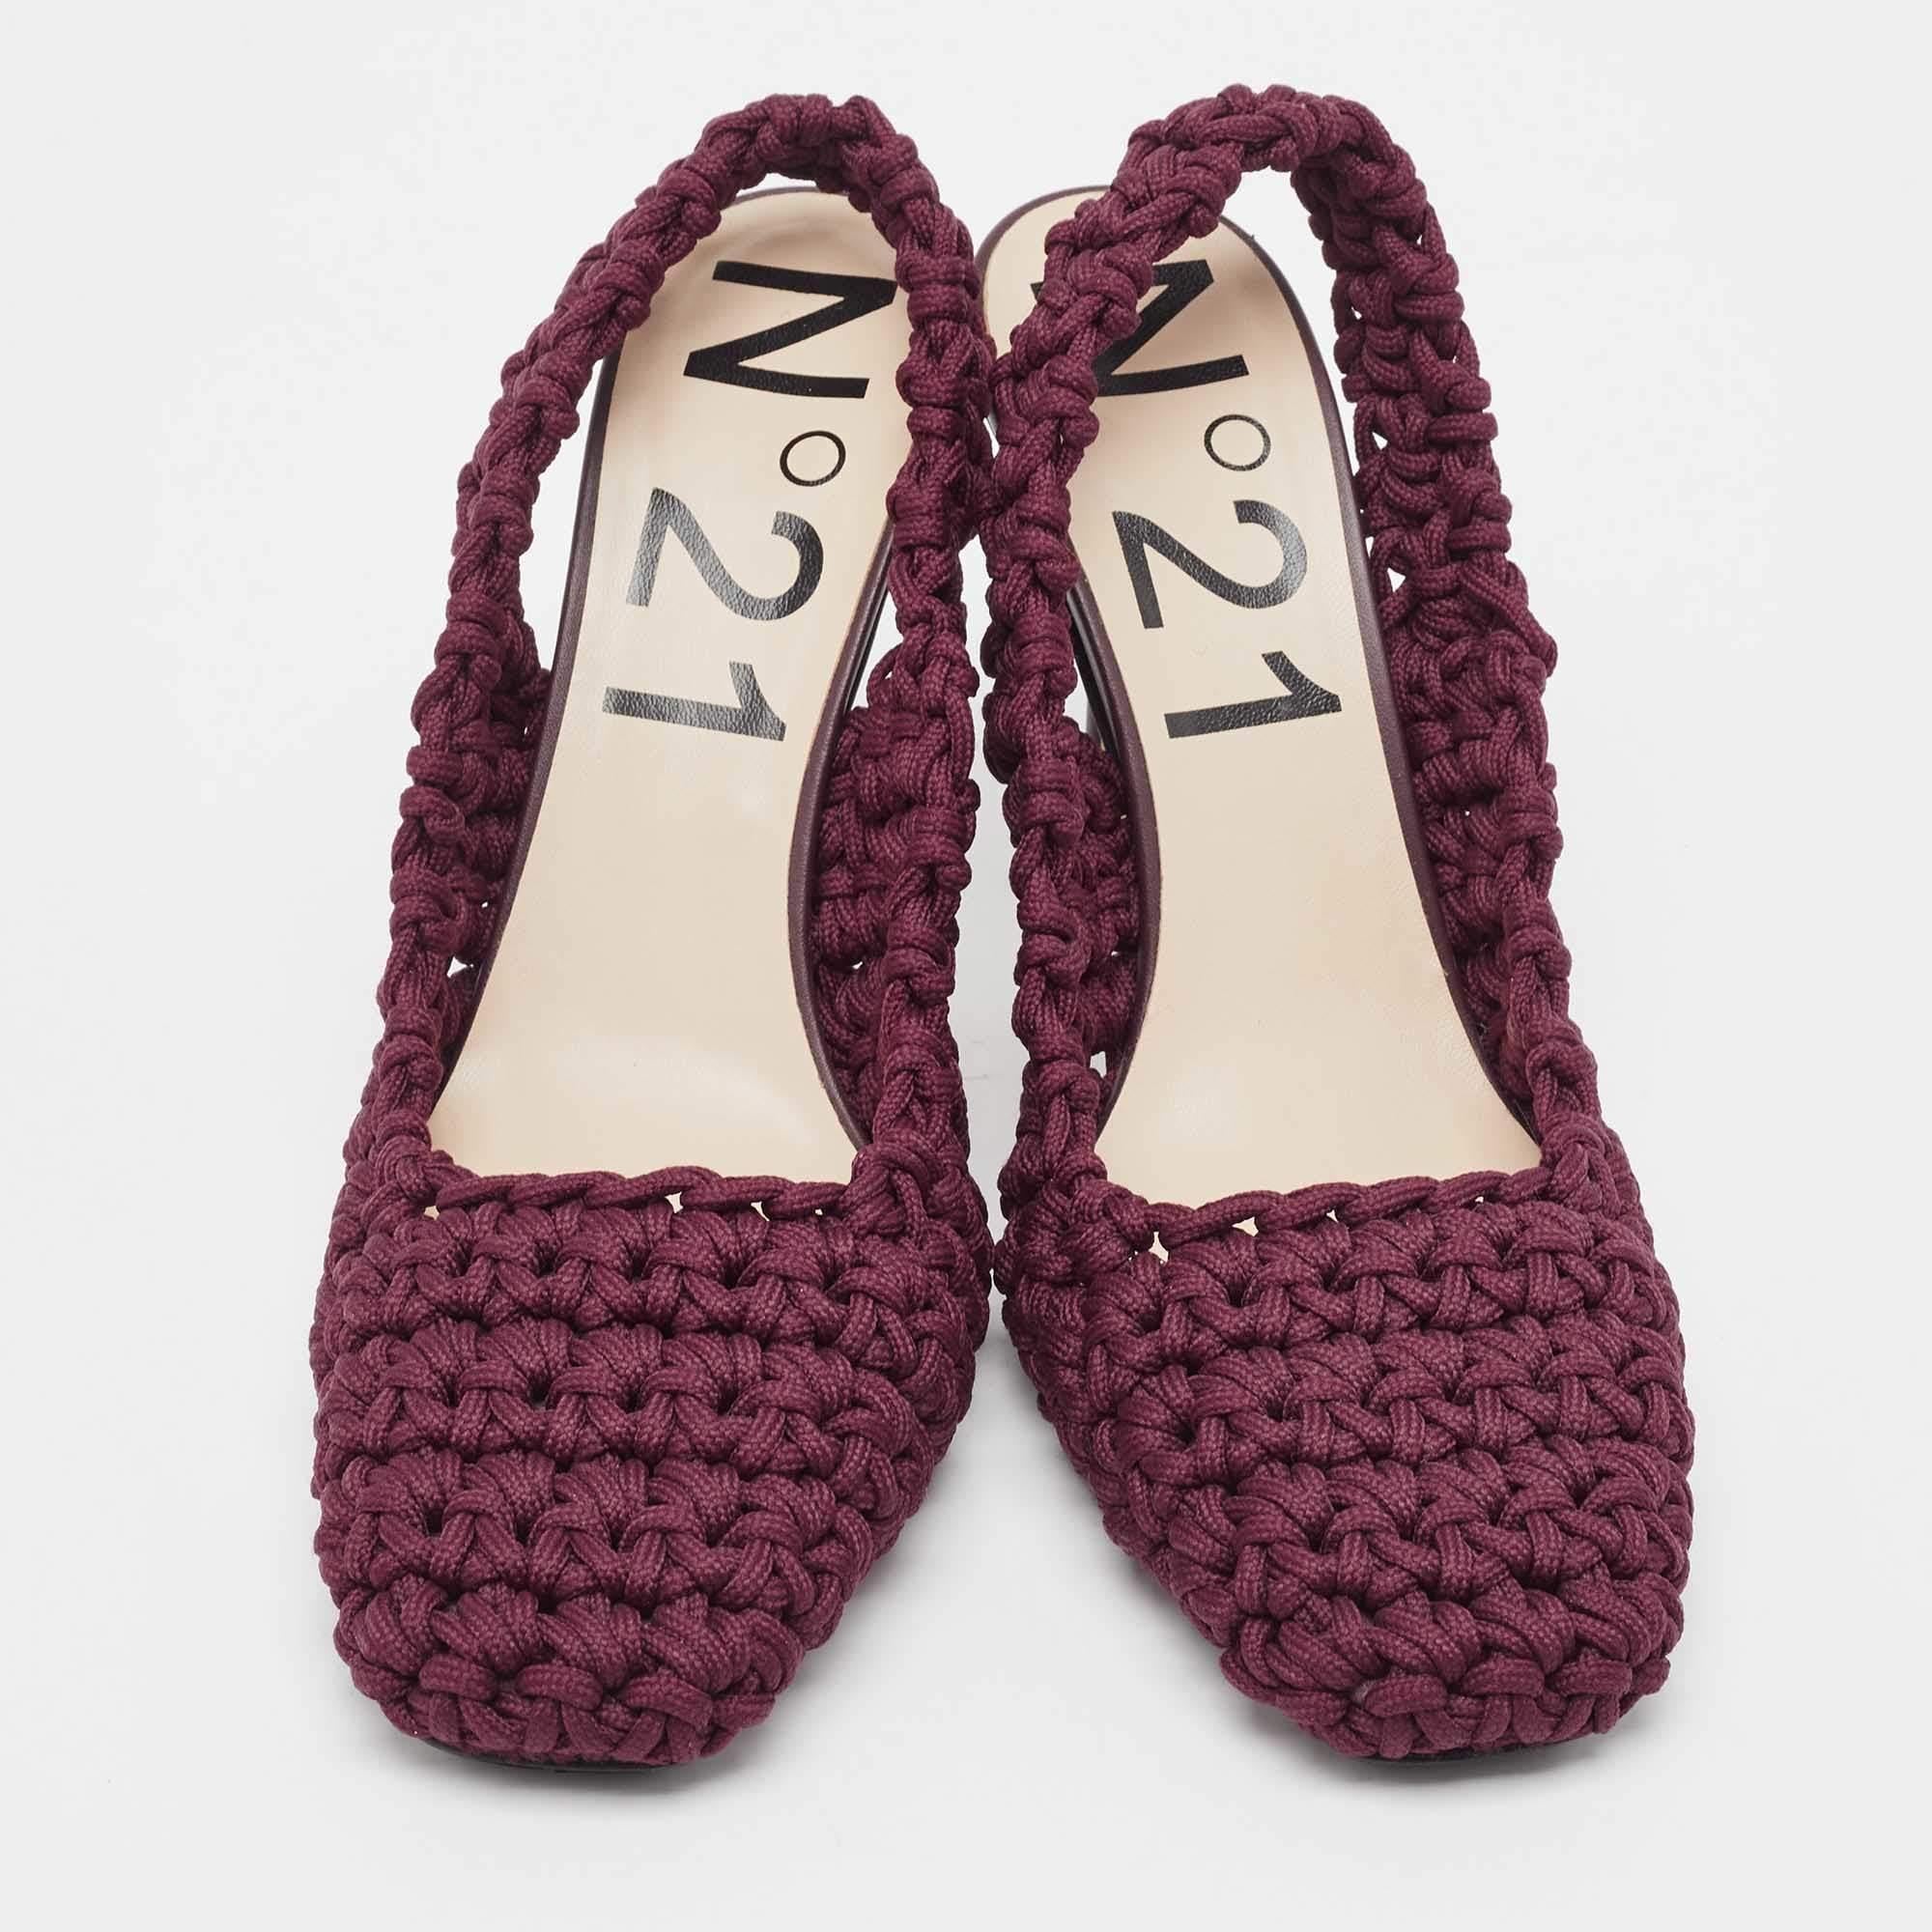 Adorn your feet with the graceful charm of the Nº21 pumps. Crafted with meticulous artistry, these pumps boast a rich burgundy hue complemented by intricate crochet detailing. Effortlessly chic and versatile, they effortlessly blend style and